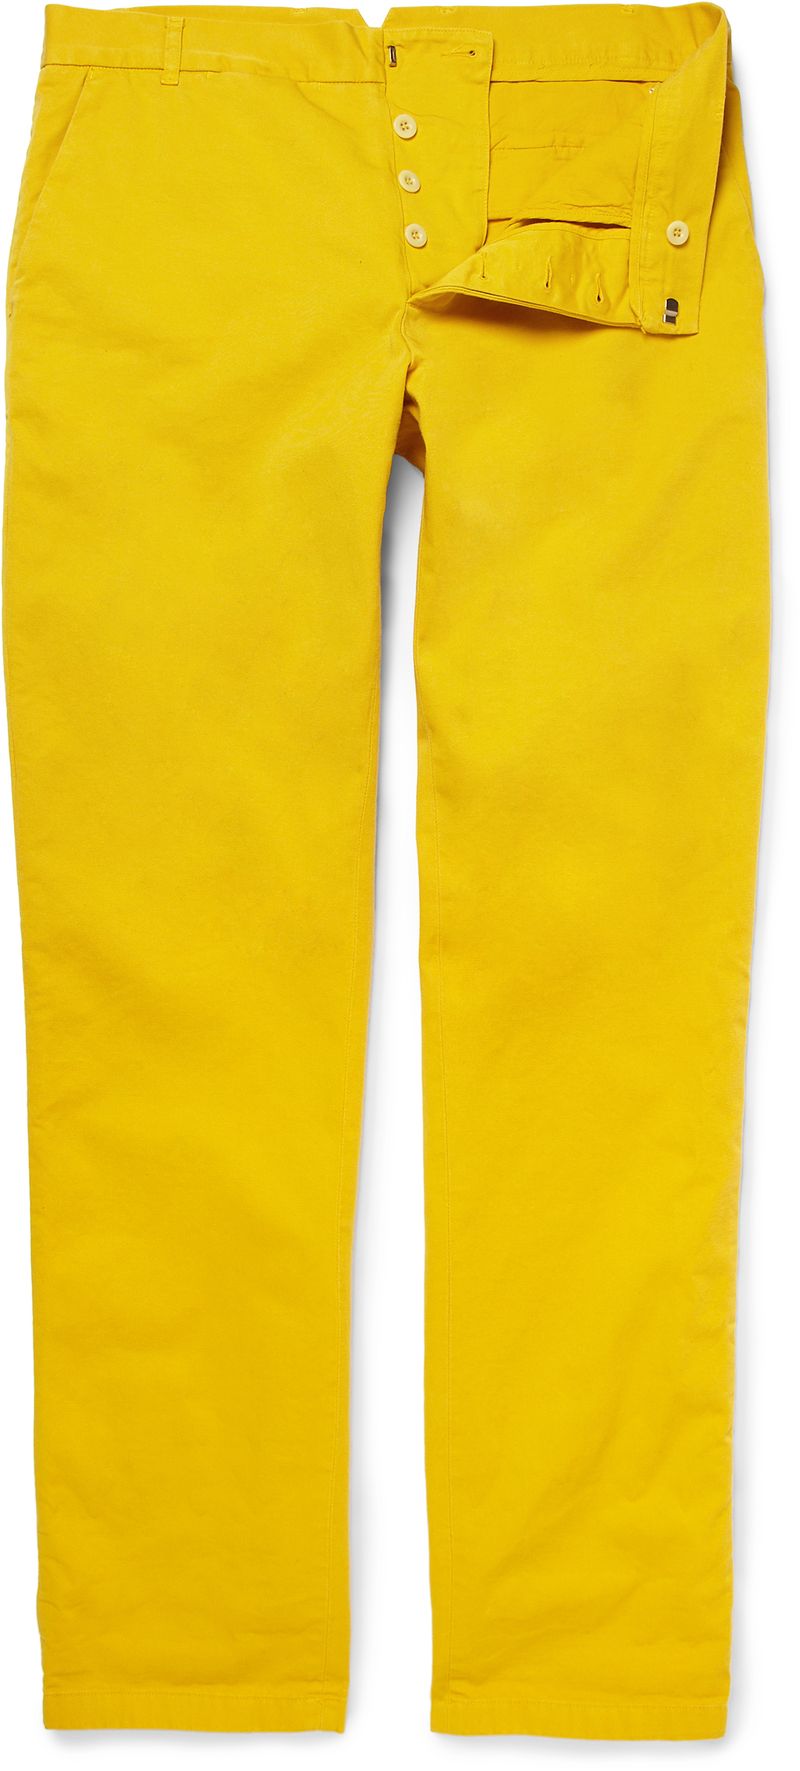 184025 Band of Outsiders yellow chinos